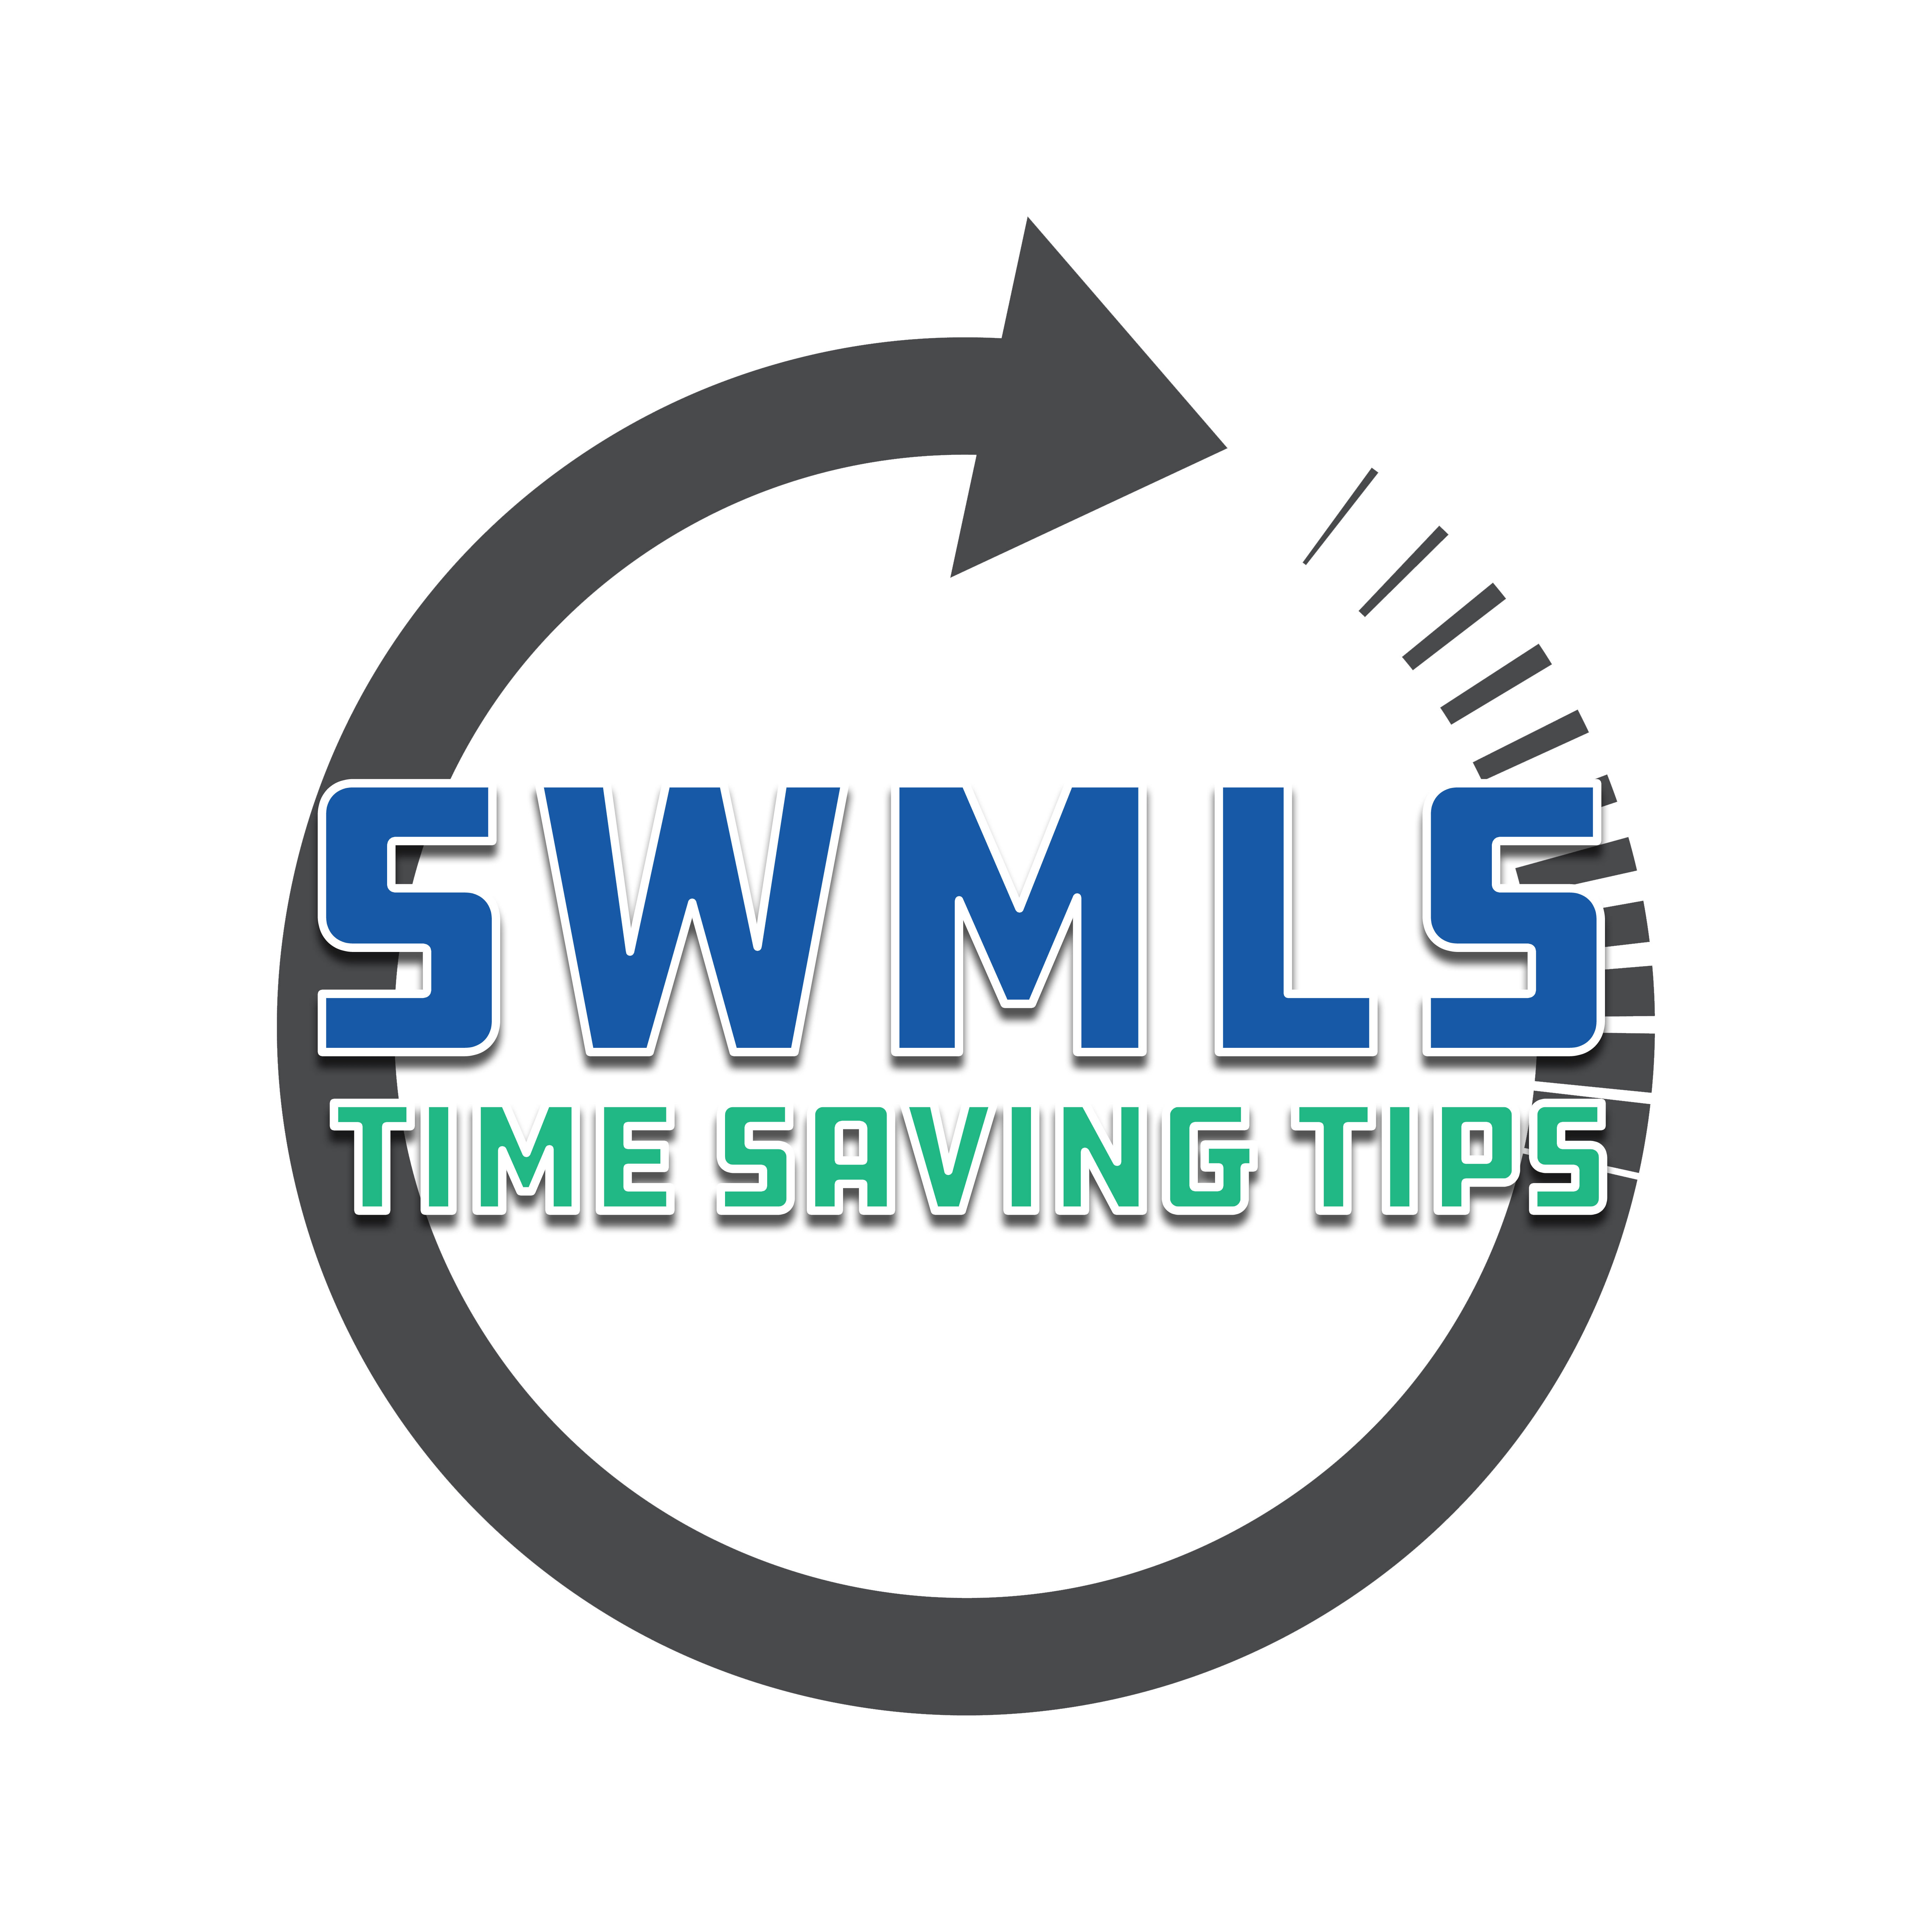 SWMLS Time Saver Tips: Reverse Prospecting